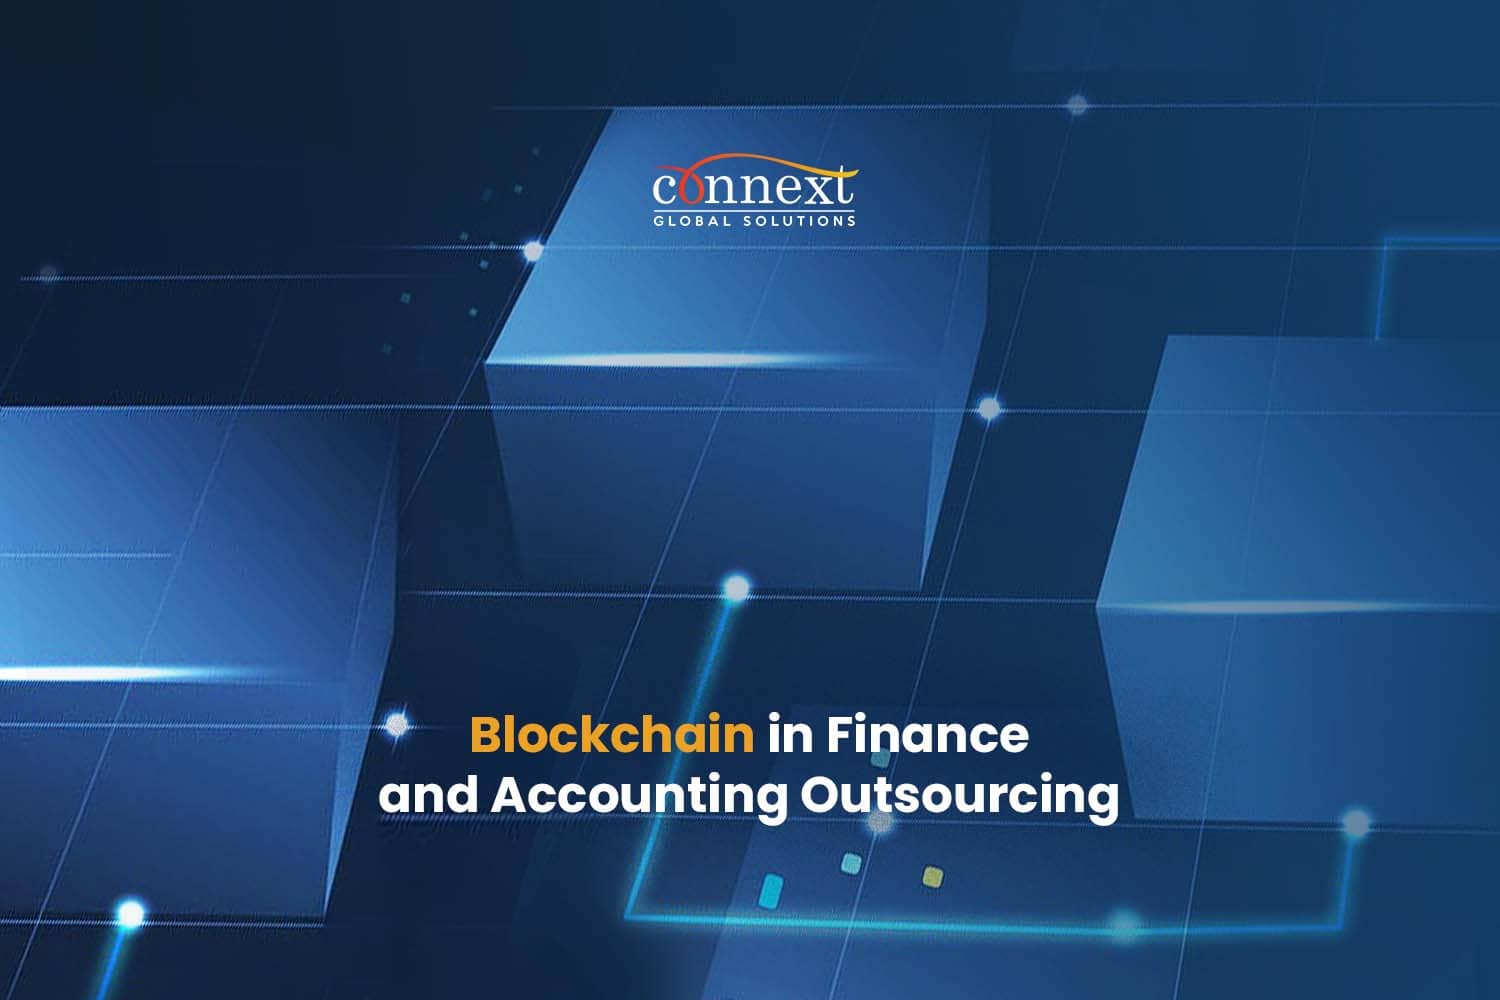 Blockchain in Finance and Accounting Outsourcing